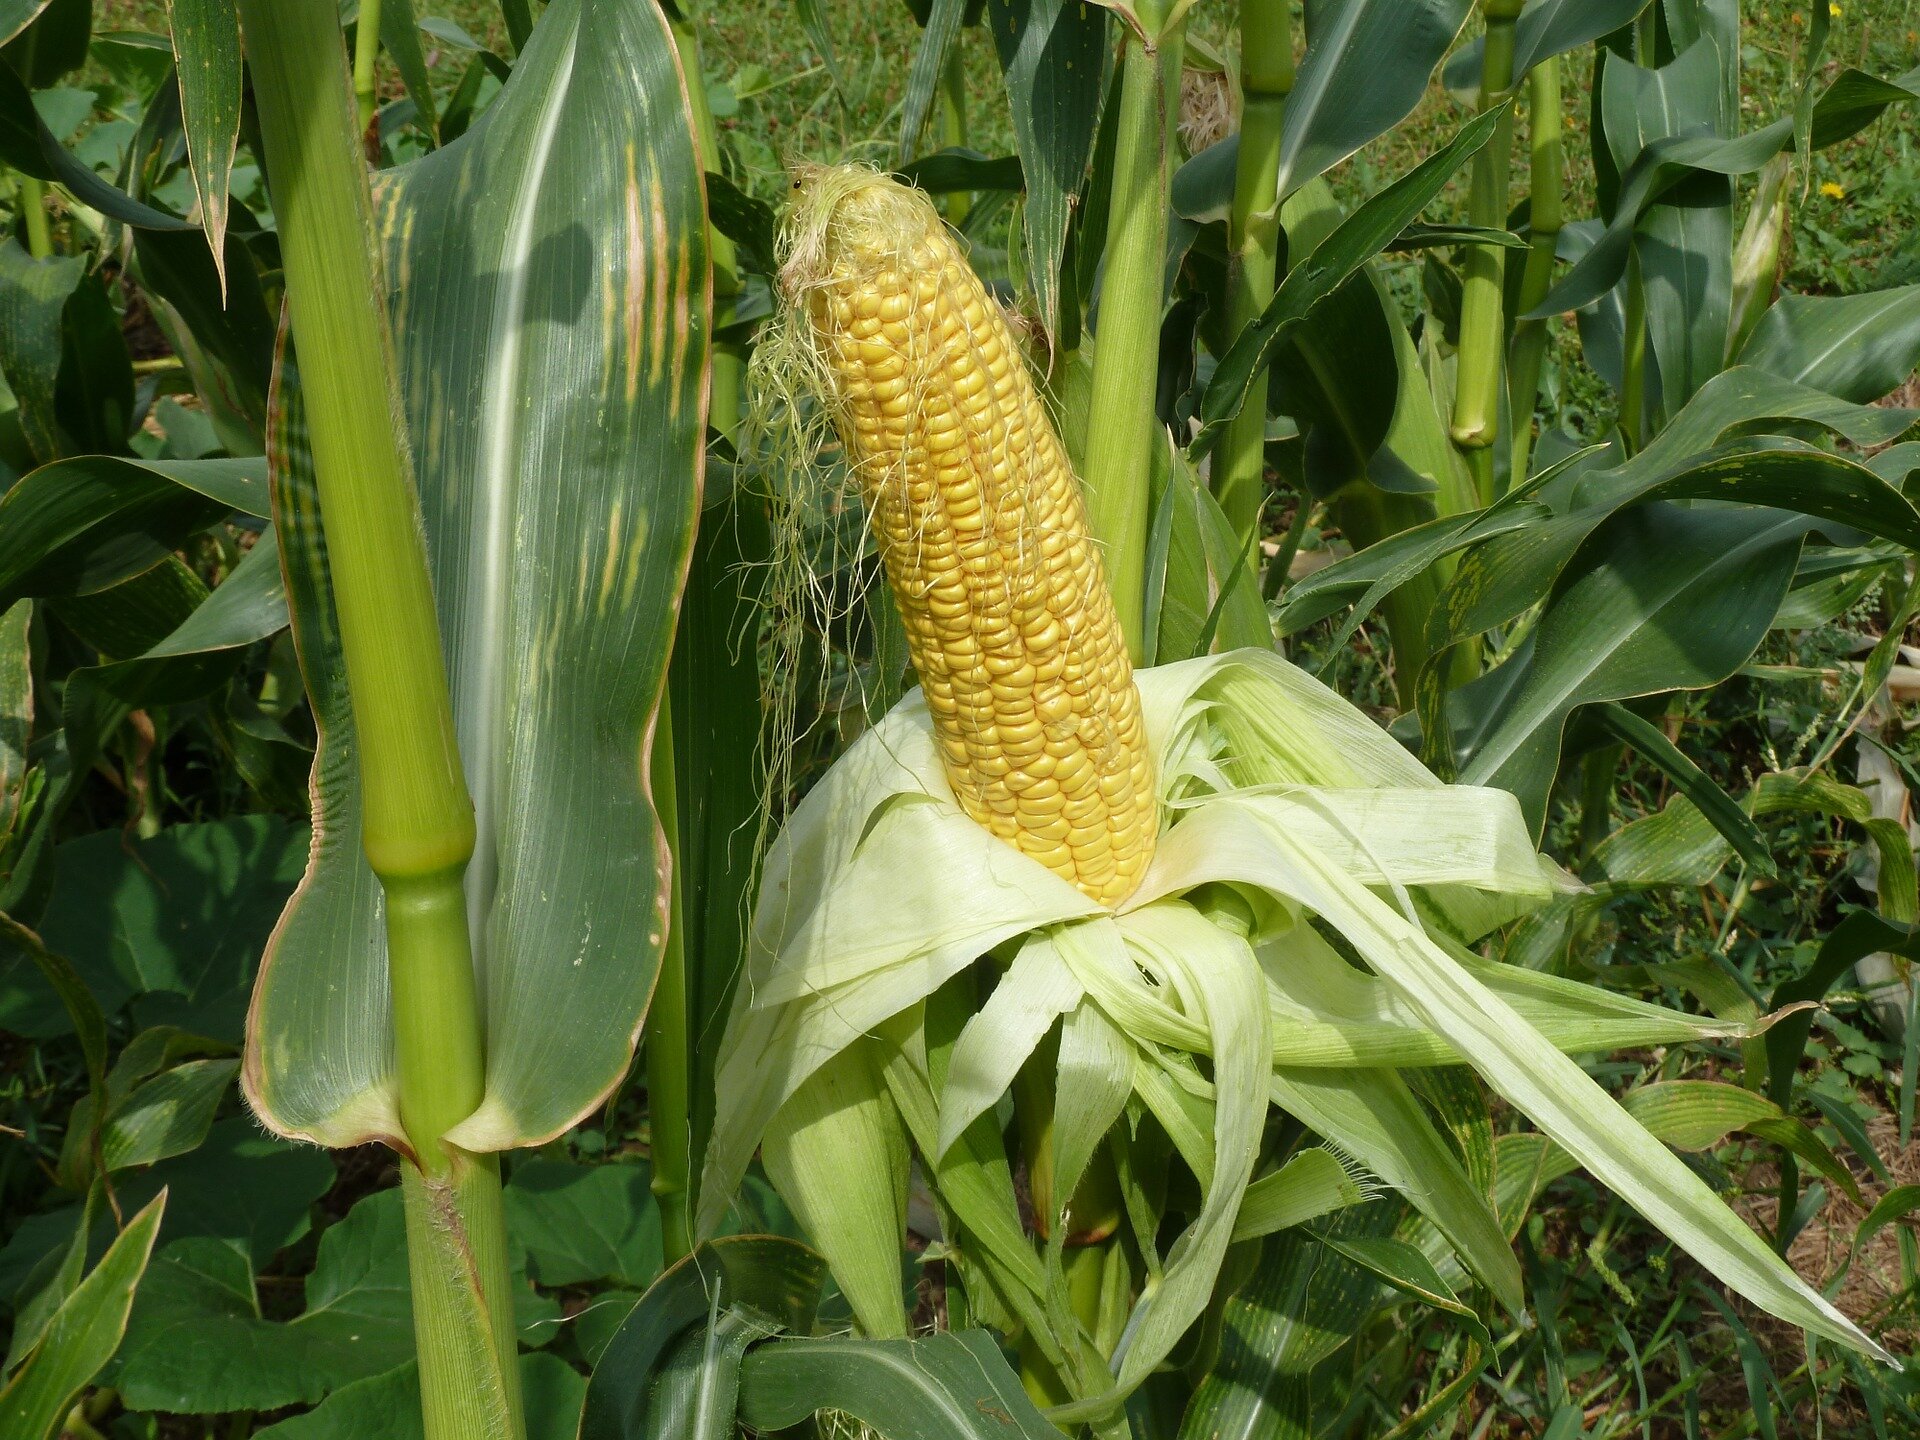 Sweet corn yield gain over 80 years leaves room for improvement, according to study